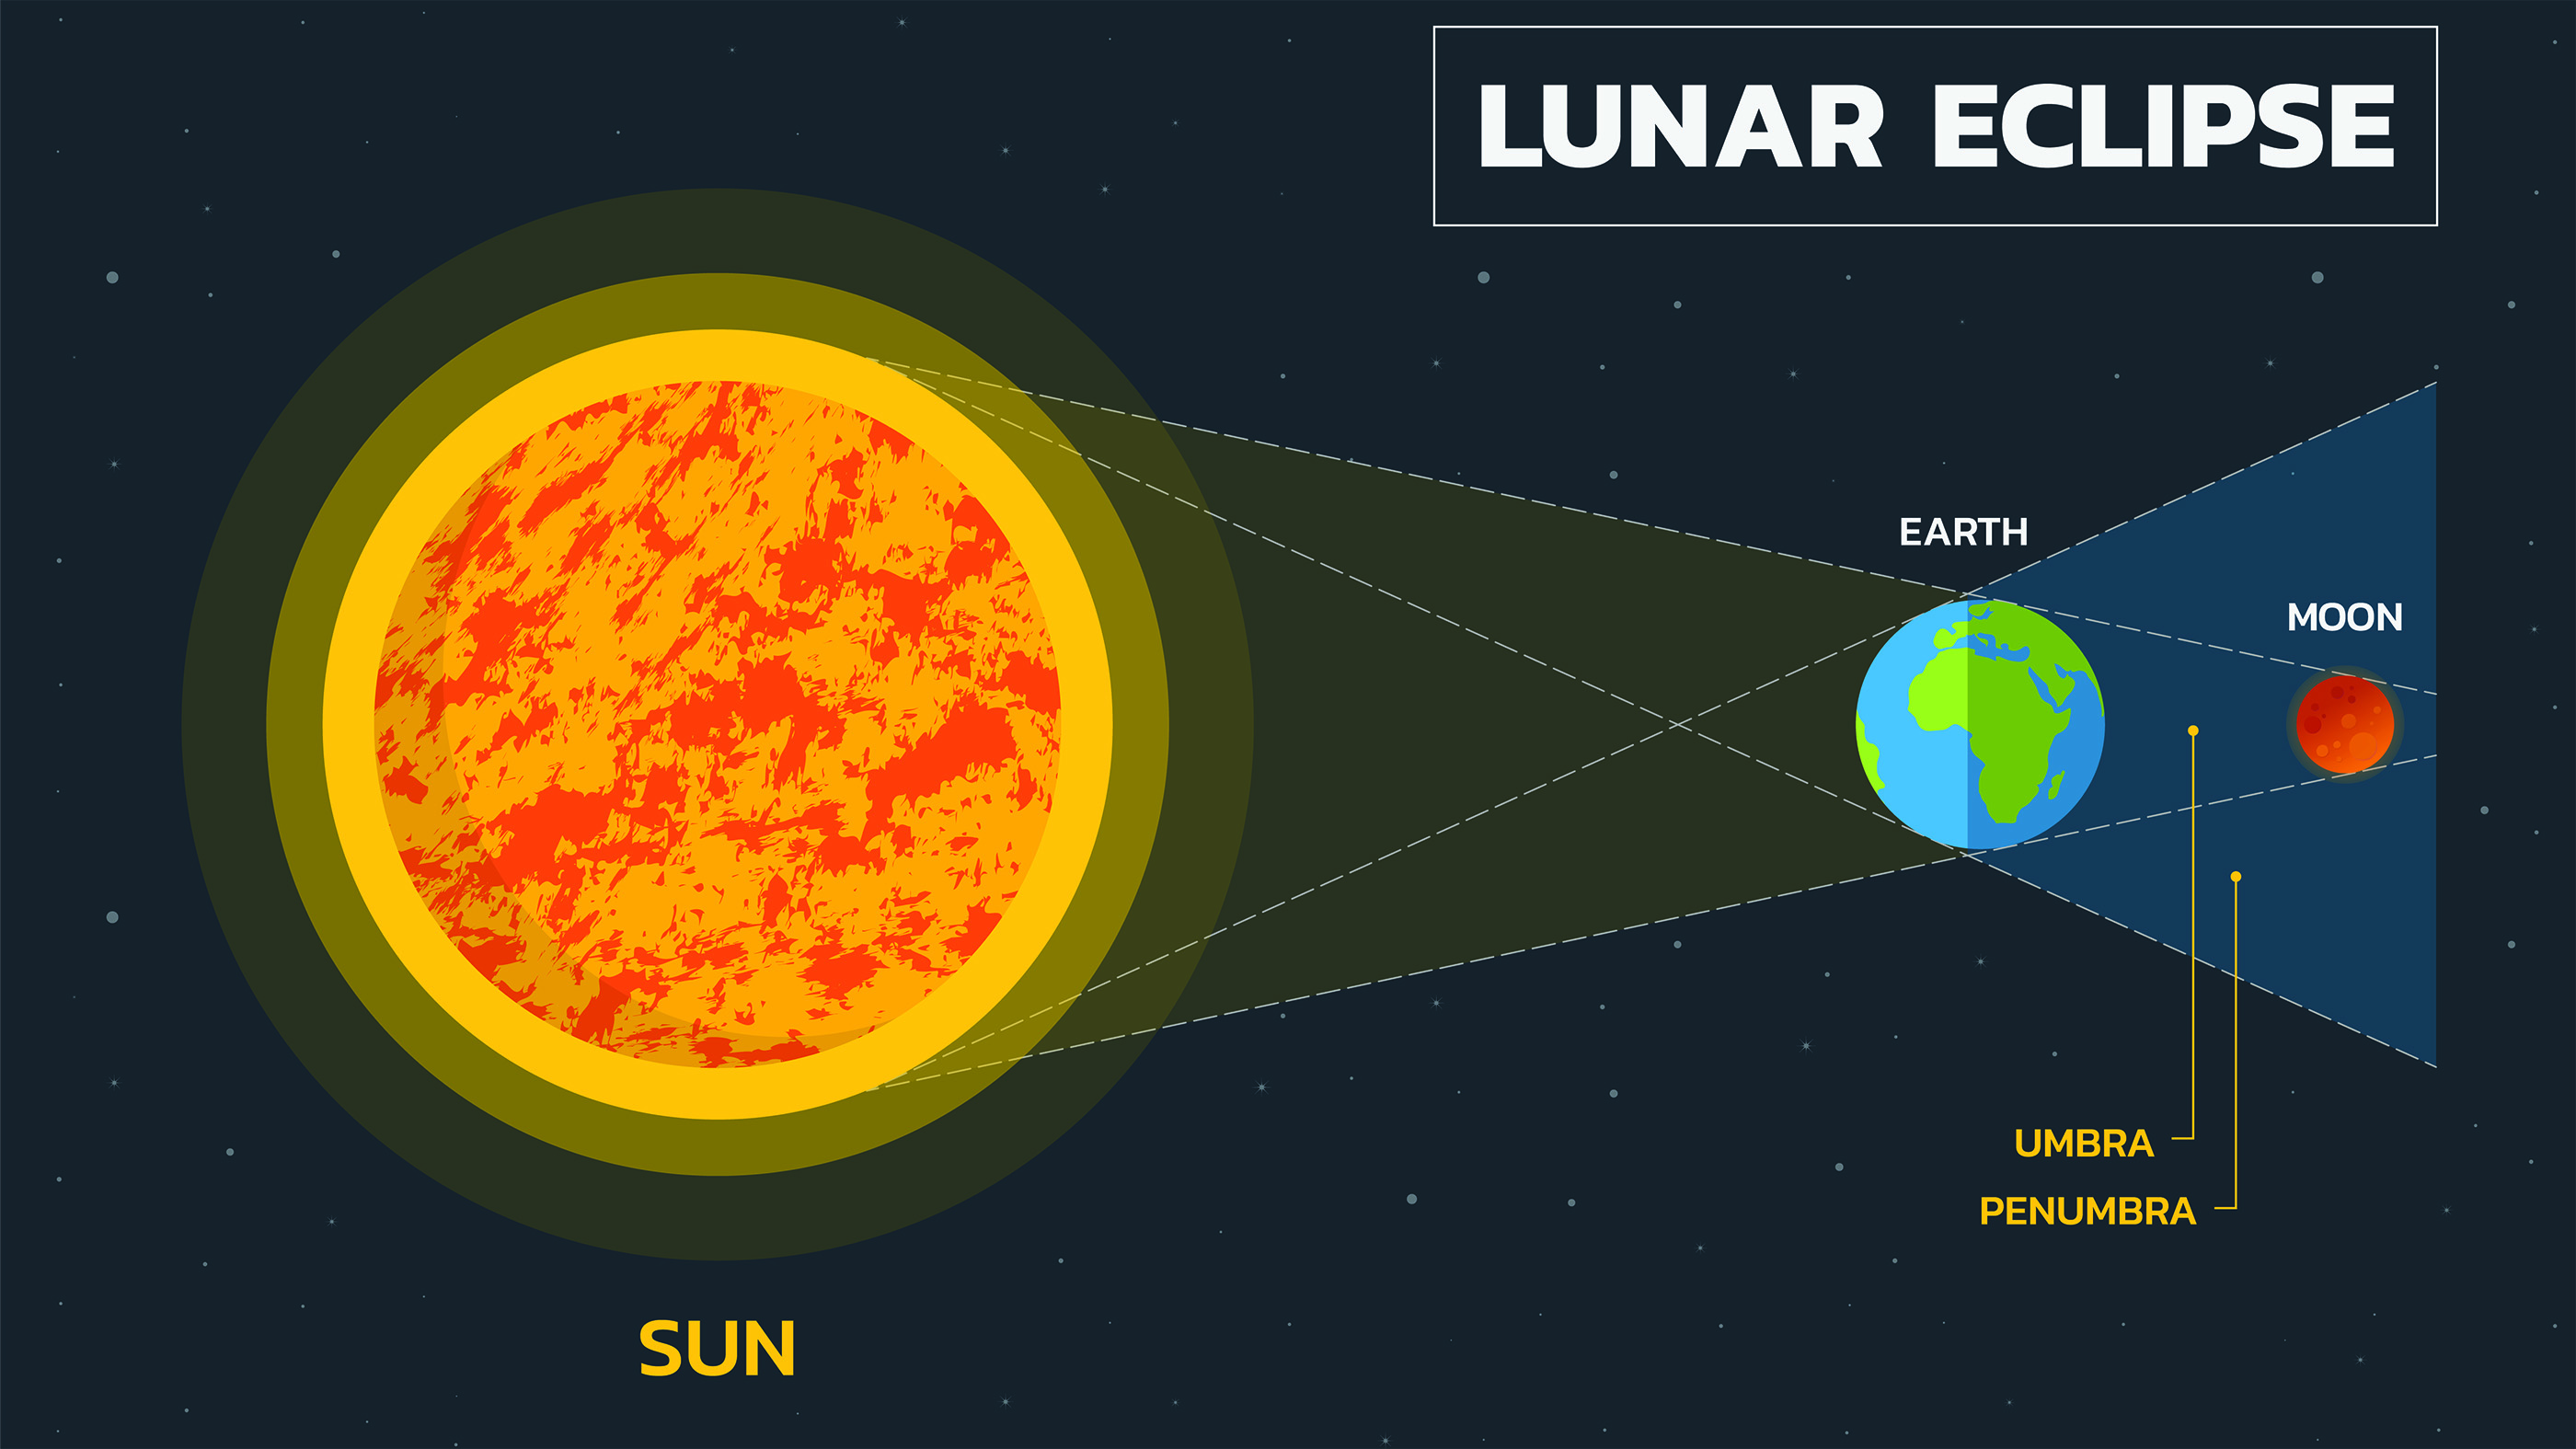 A lunar eclipse happens when the sun, moon and Earth are lined up in that exact order.